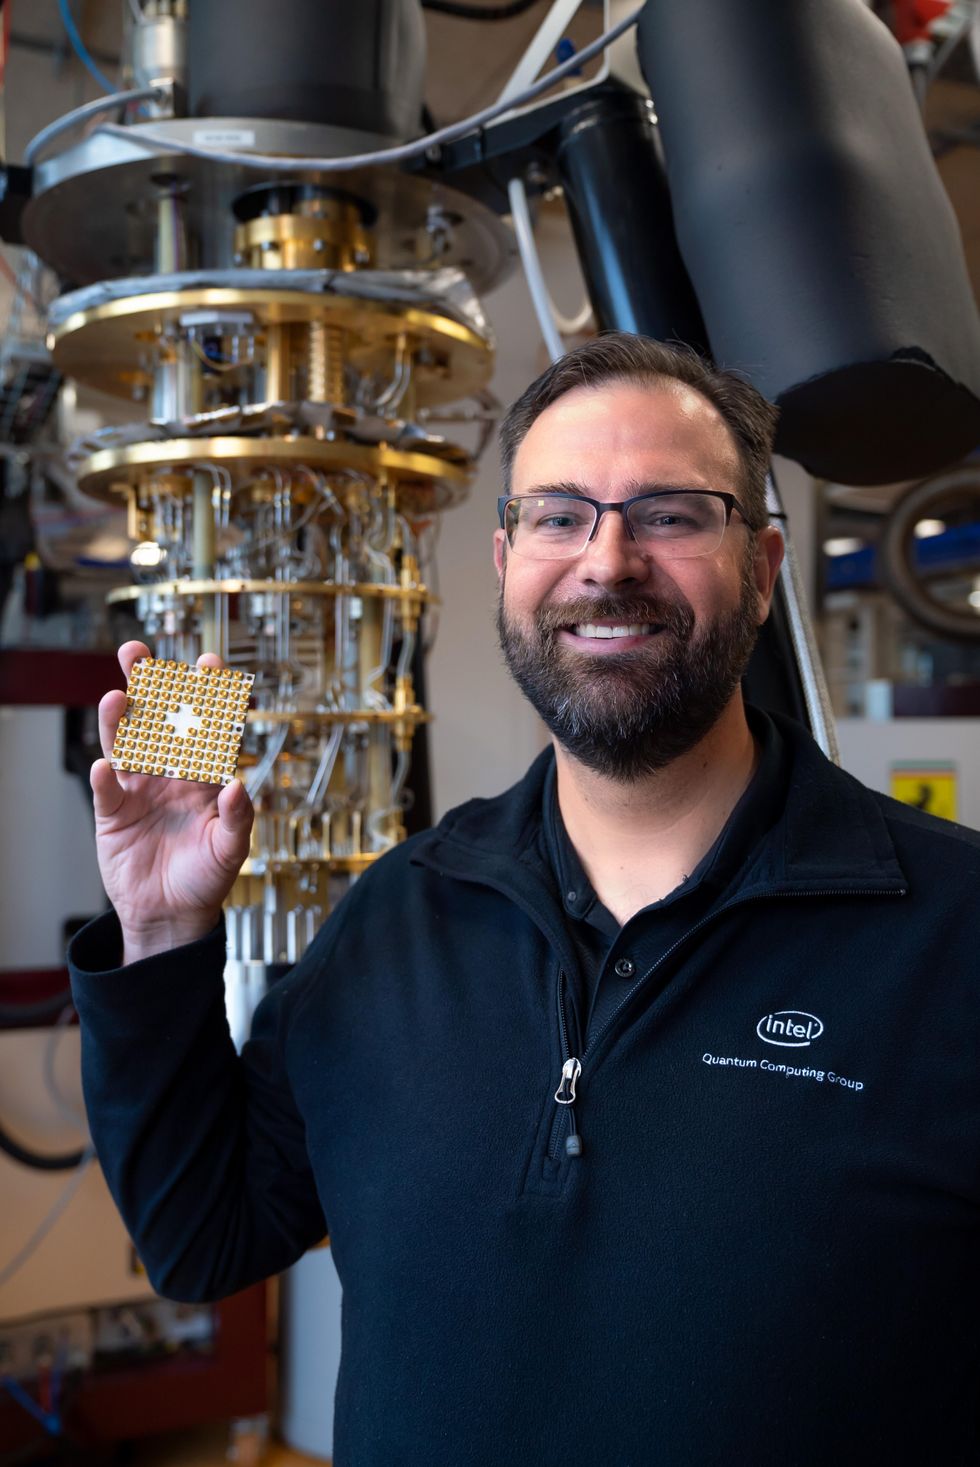 A man holds a bumpy gold rectangle in front of a spindly machine.